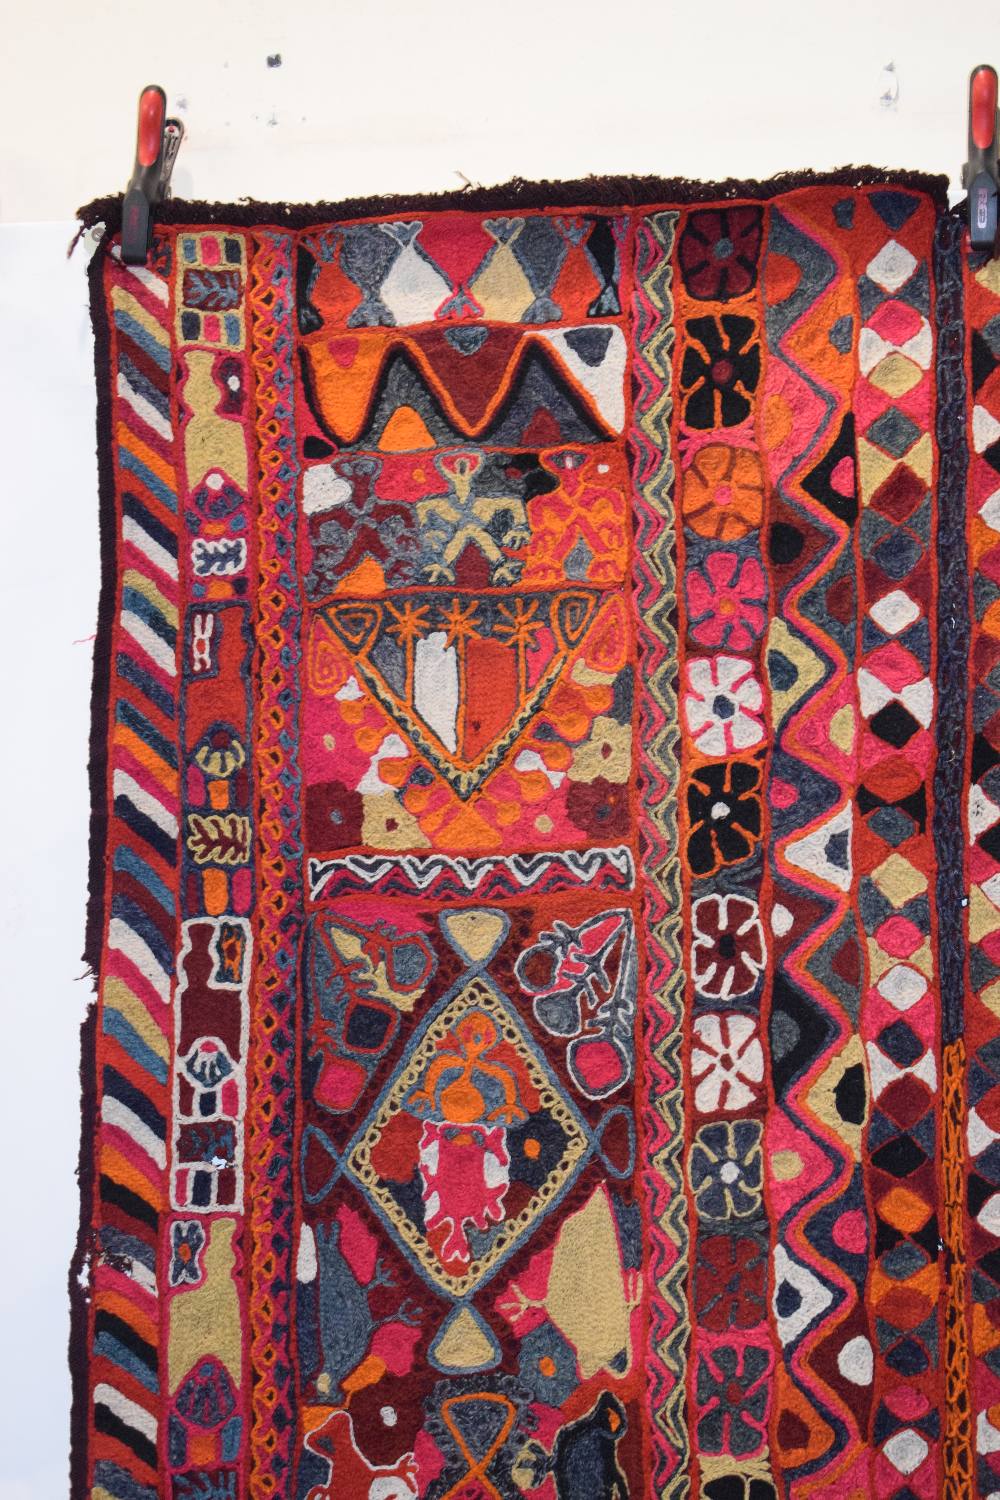 Iraqi embroidered wedding blanket, Samawa, Marshlands of southern Iraq, 20th century, 8ft. 7in. X - Image 5 of 10